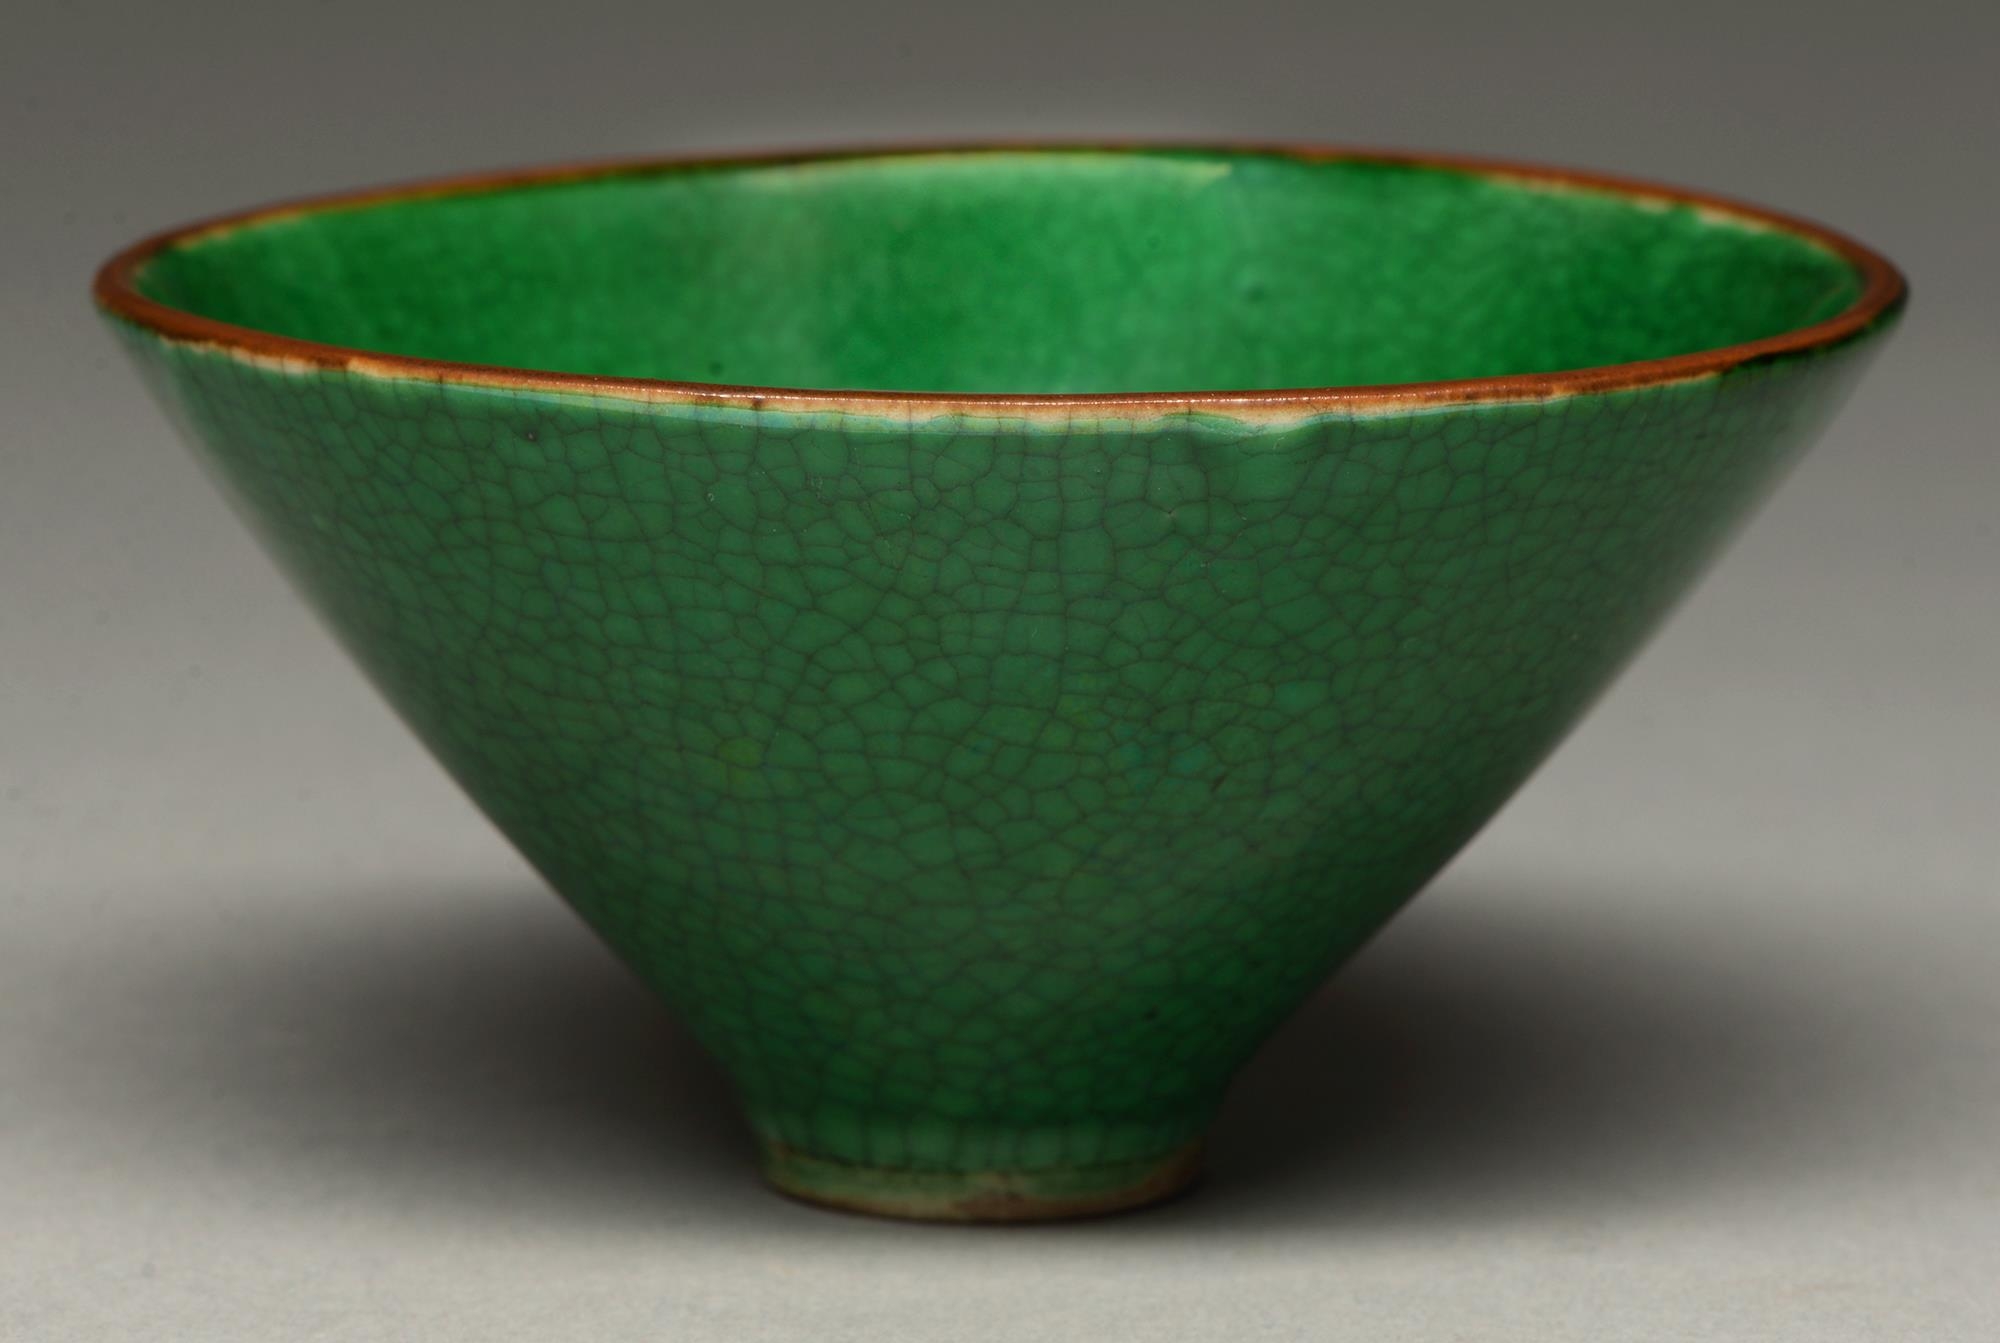 A Chinese vivid green glazed biscuit conical bowl, 19th/20th c, with brown rim, the crackled glaze